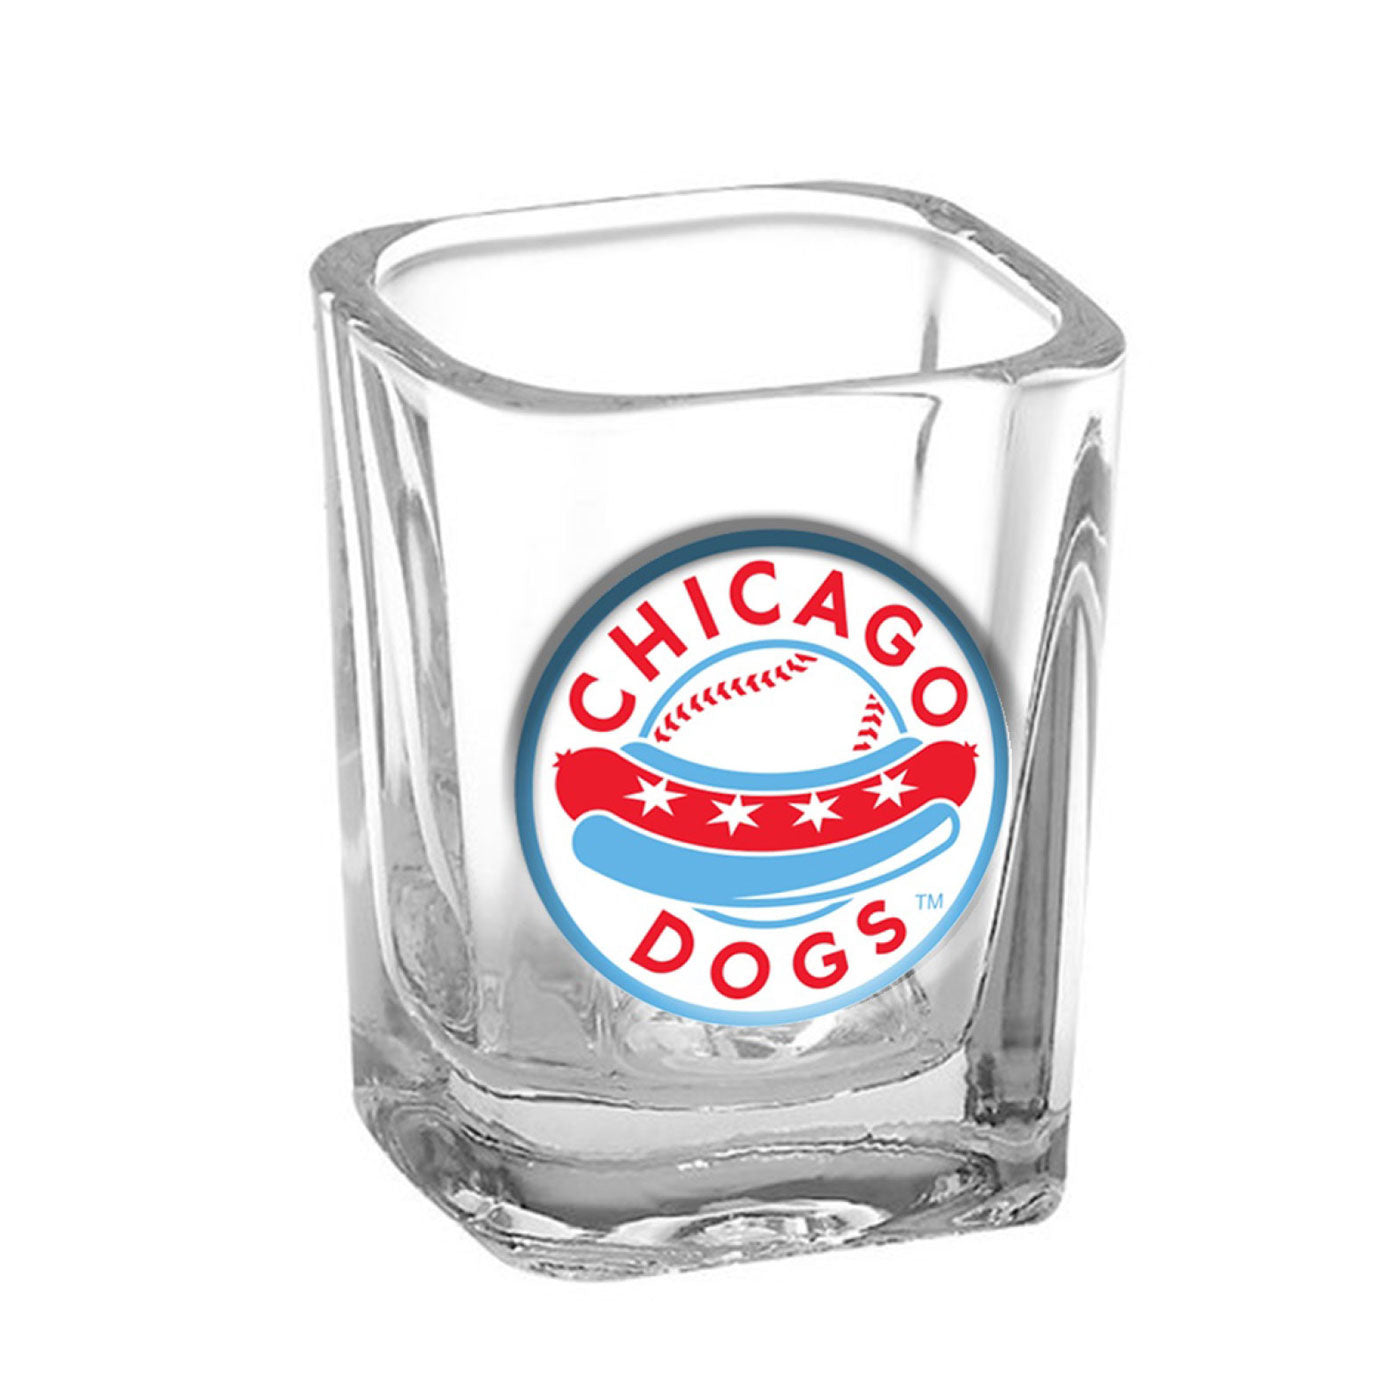 Chicago Dogs Square Shot Glass - Chicago Dogs Team Store